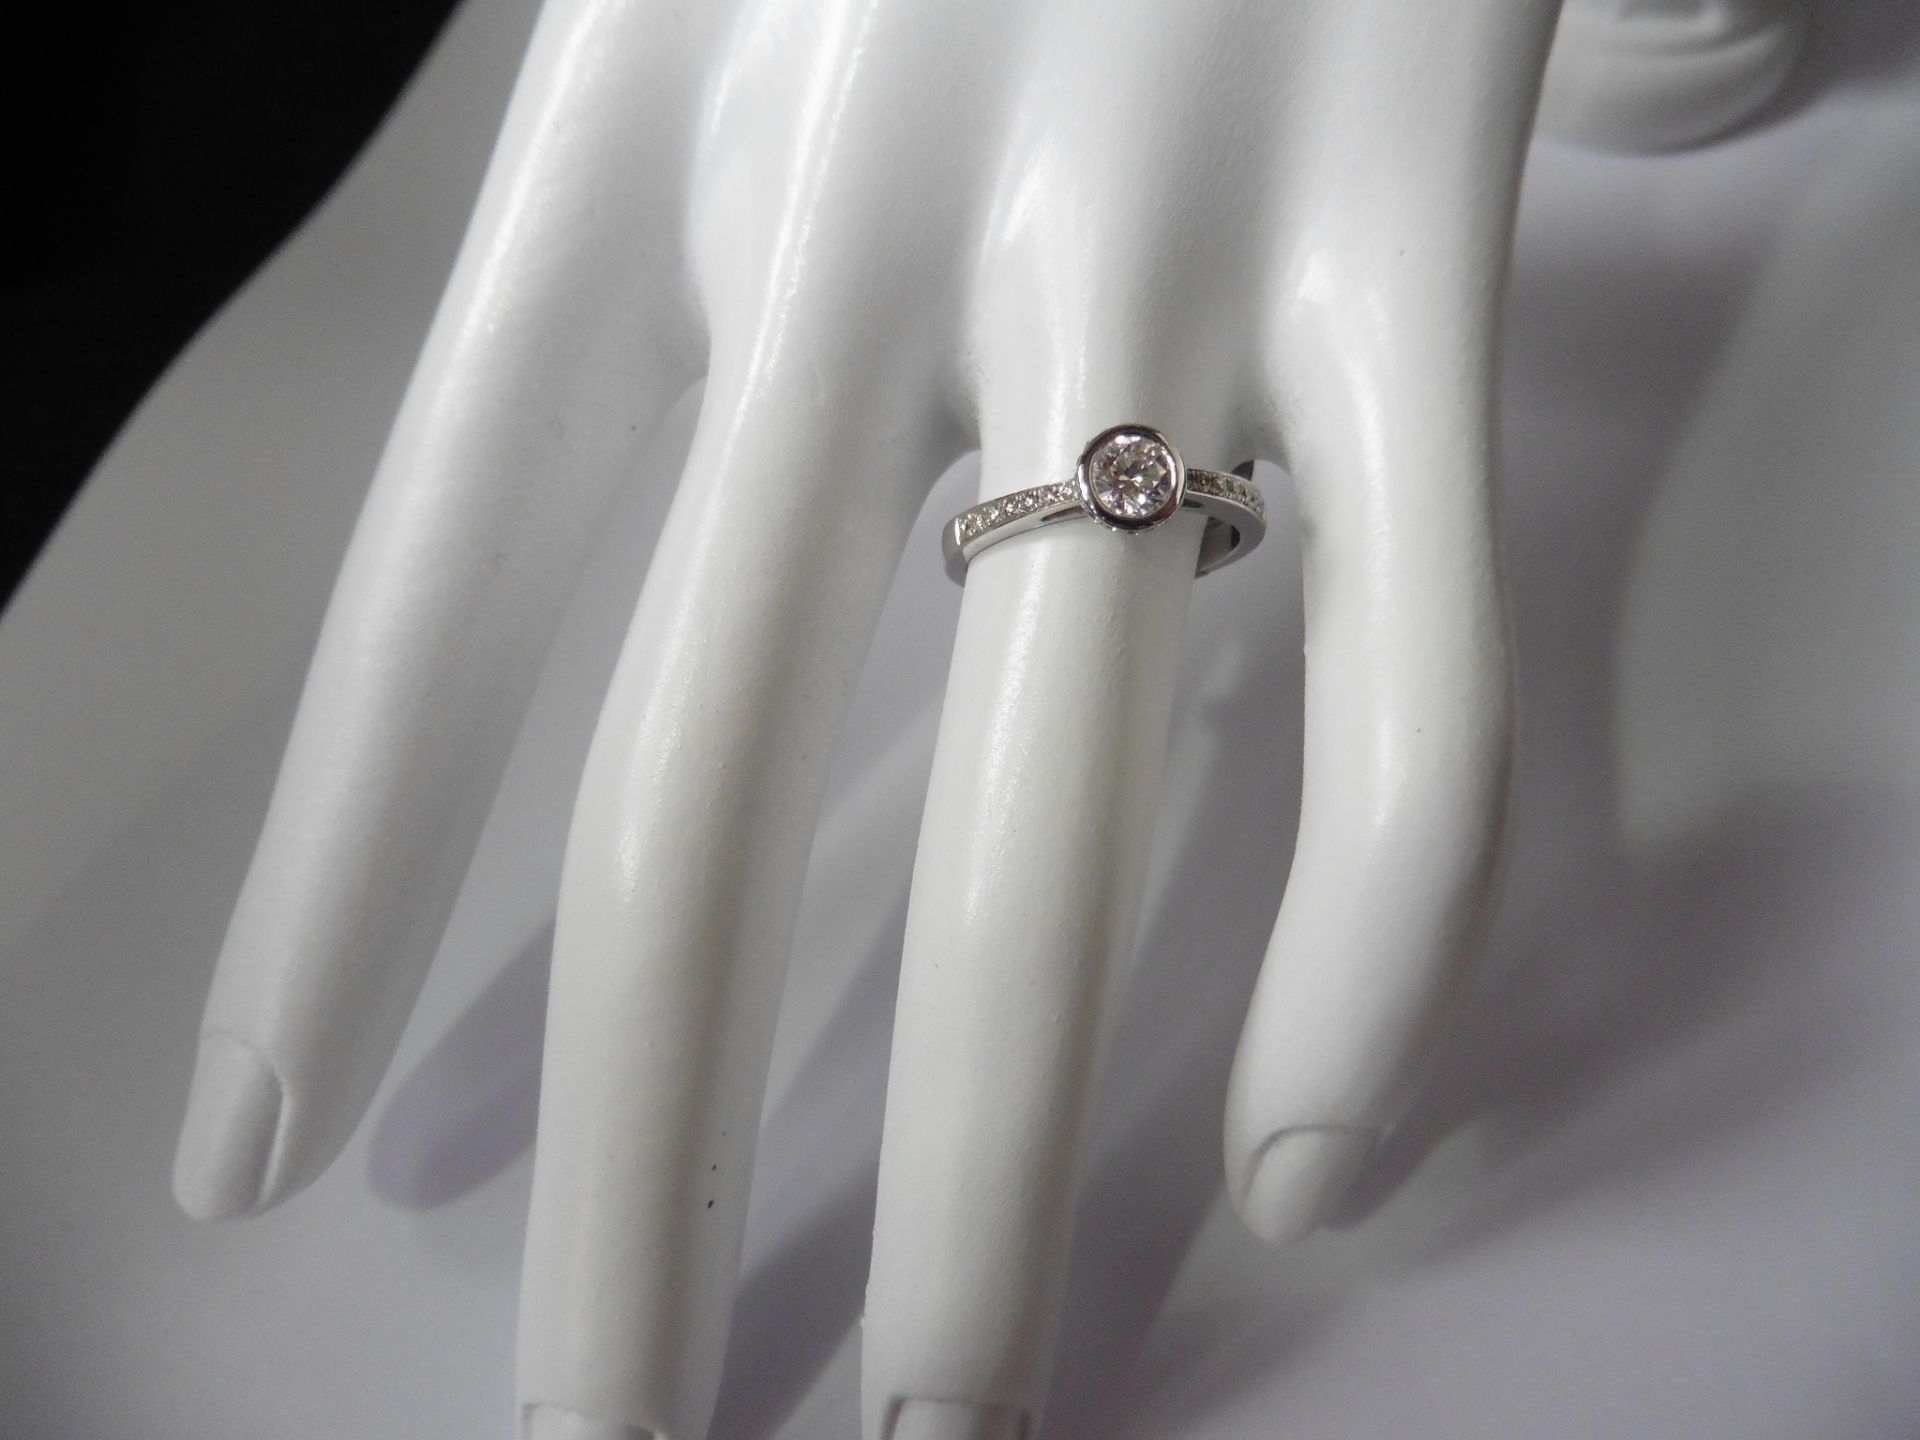 0.41ct 18ct white gold diamond set solitaire ring with a Brilliant cut diamond secured in a rub over - Image 5 of 5